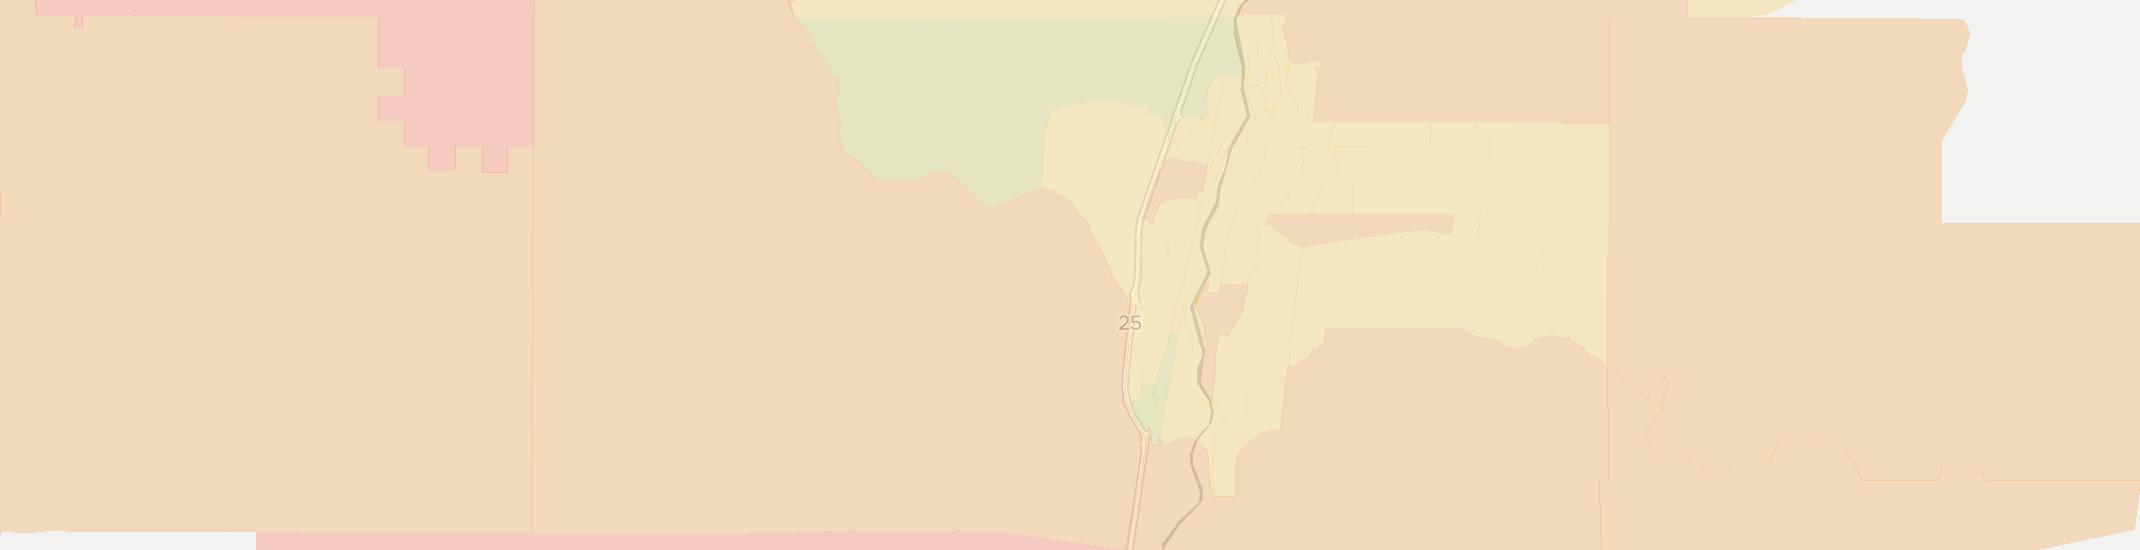 Los Lunas Internet Competition Map. Click for interactive map